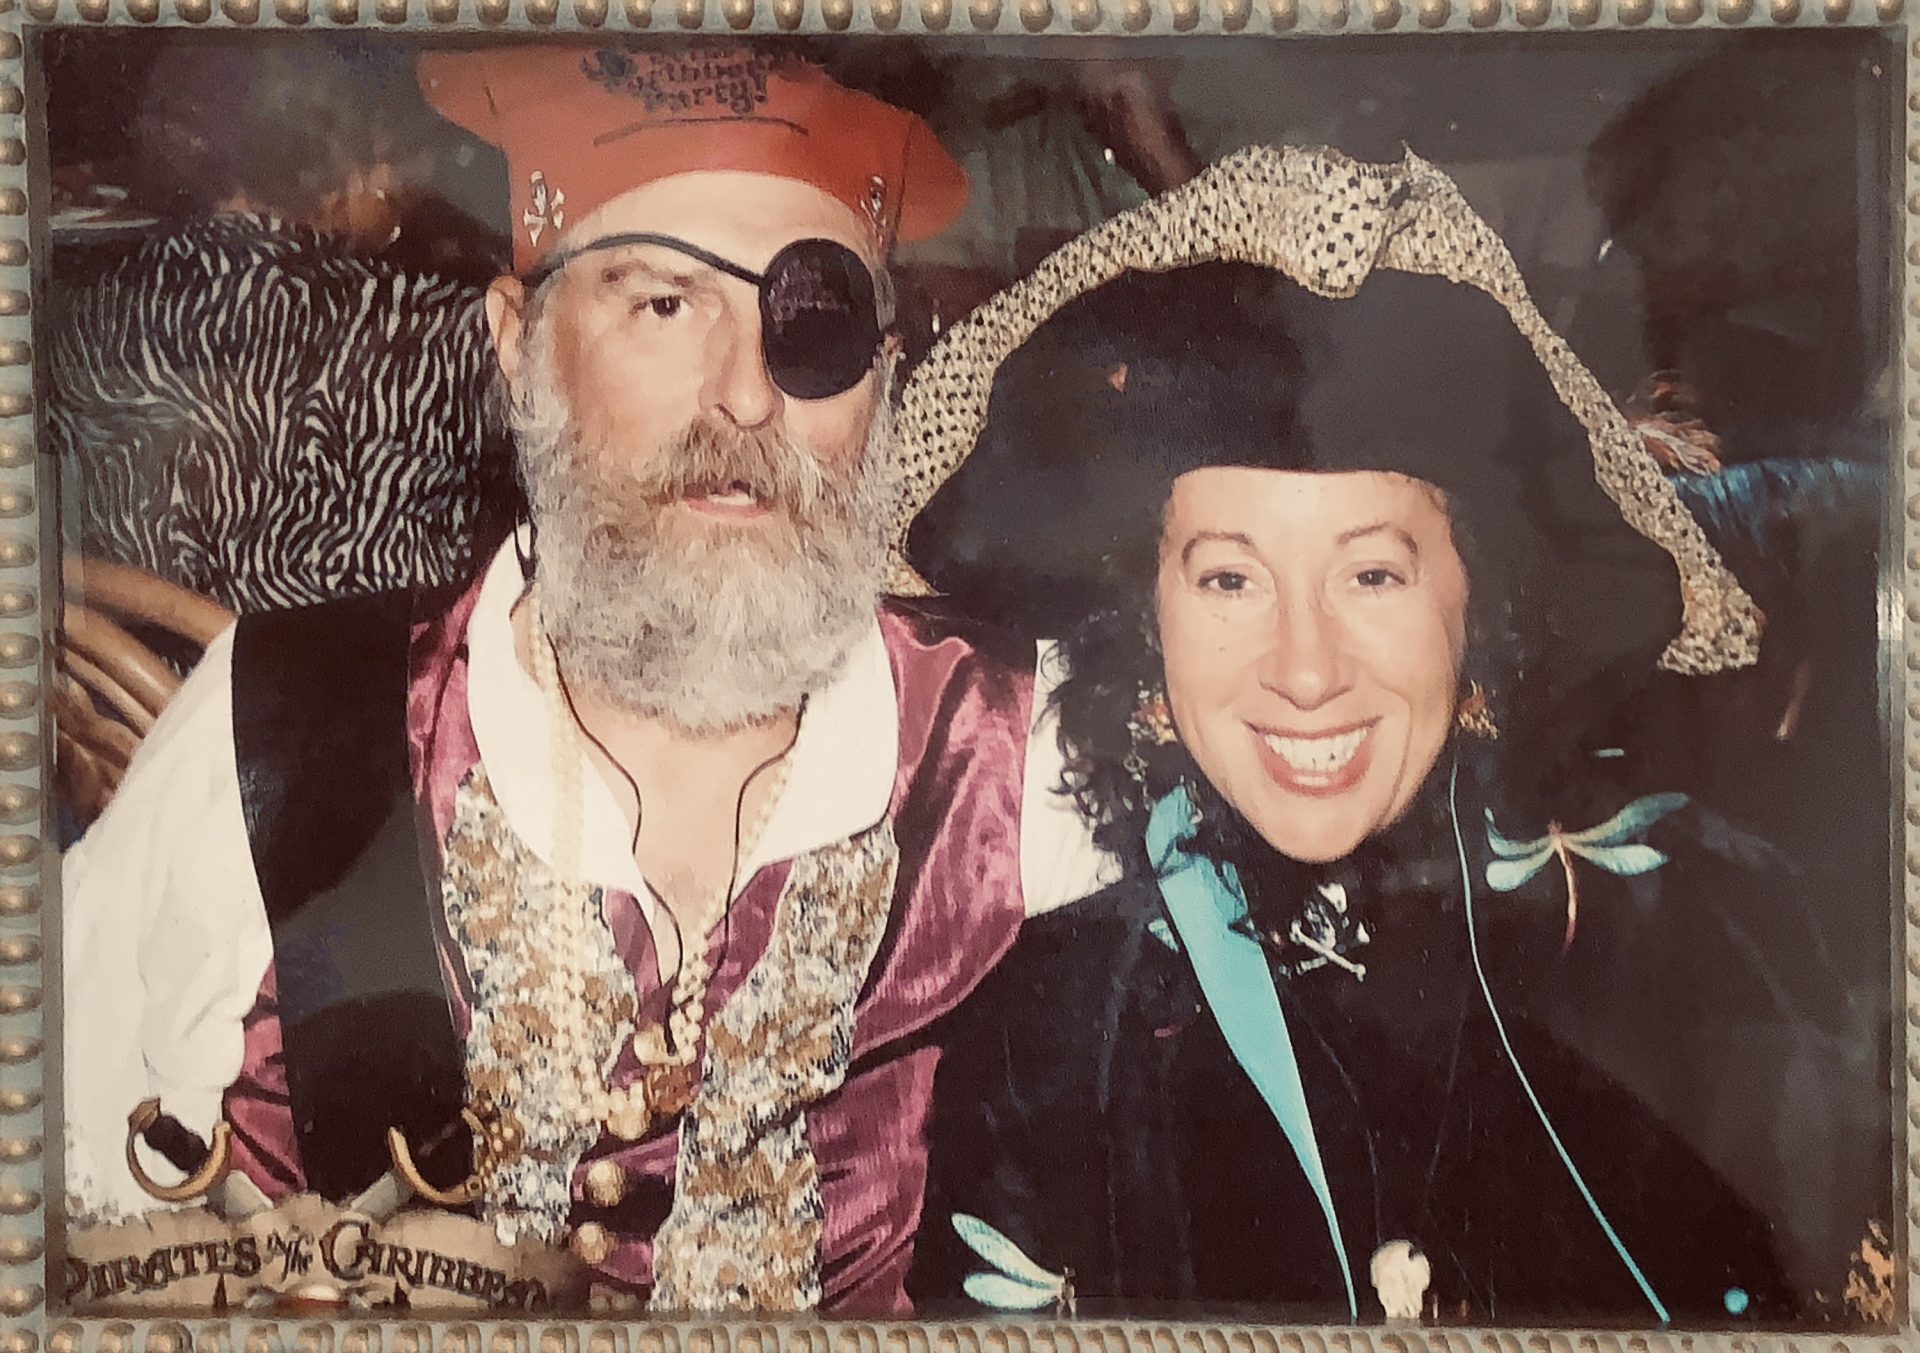 As pirates on the only cruise we ever took together.